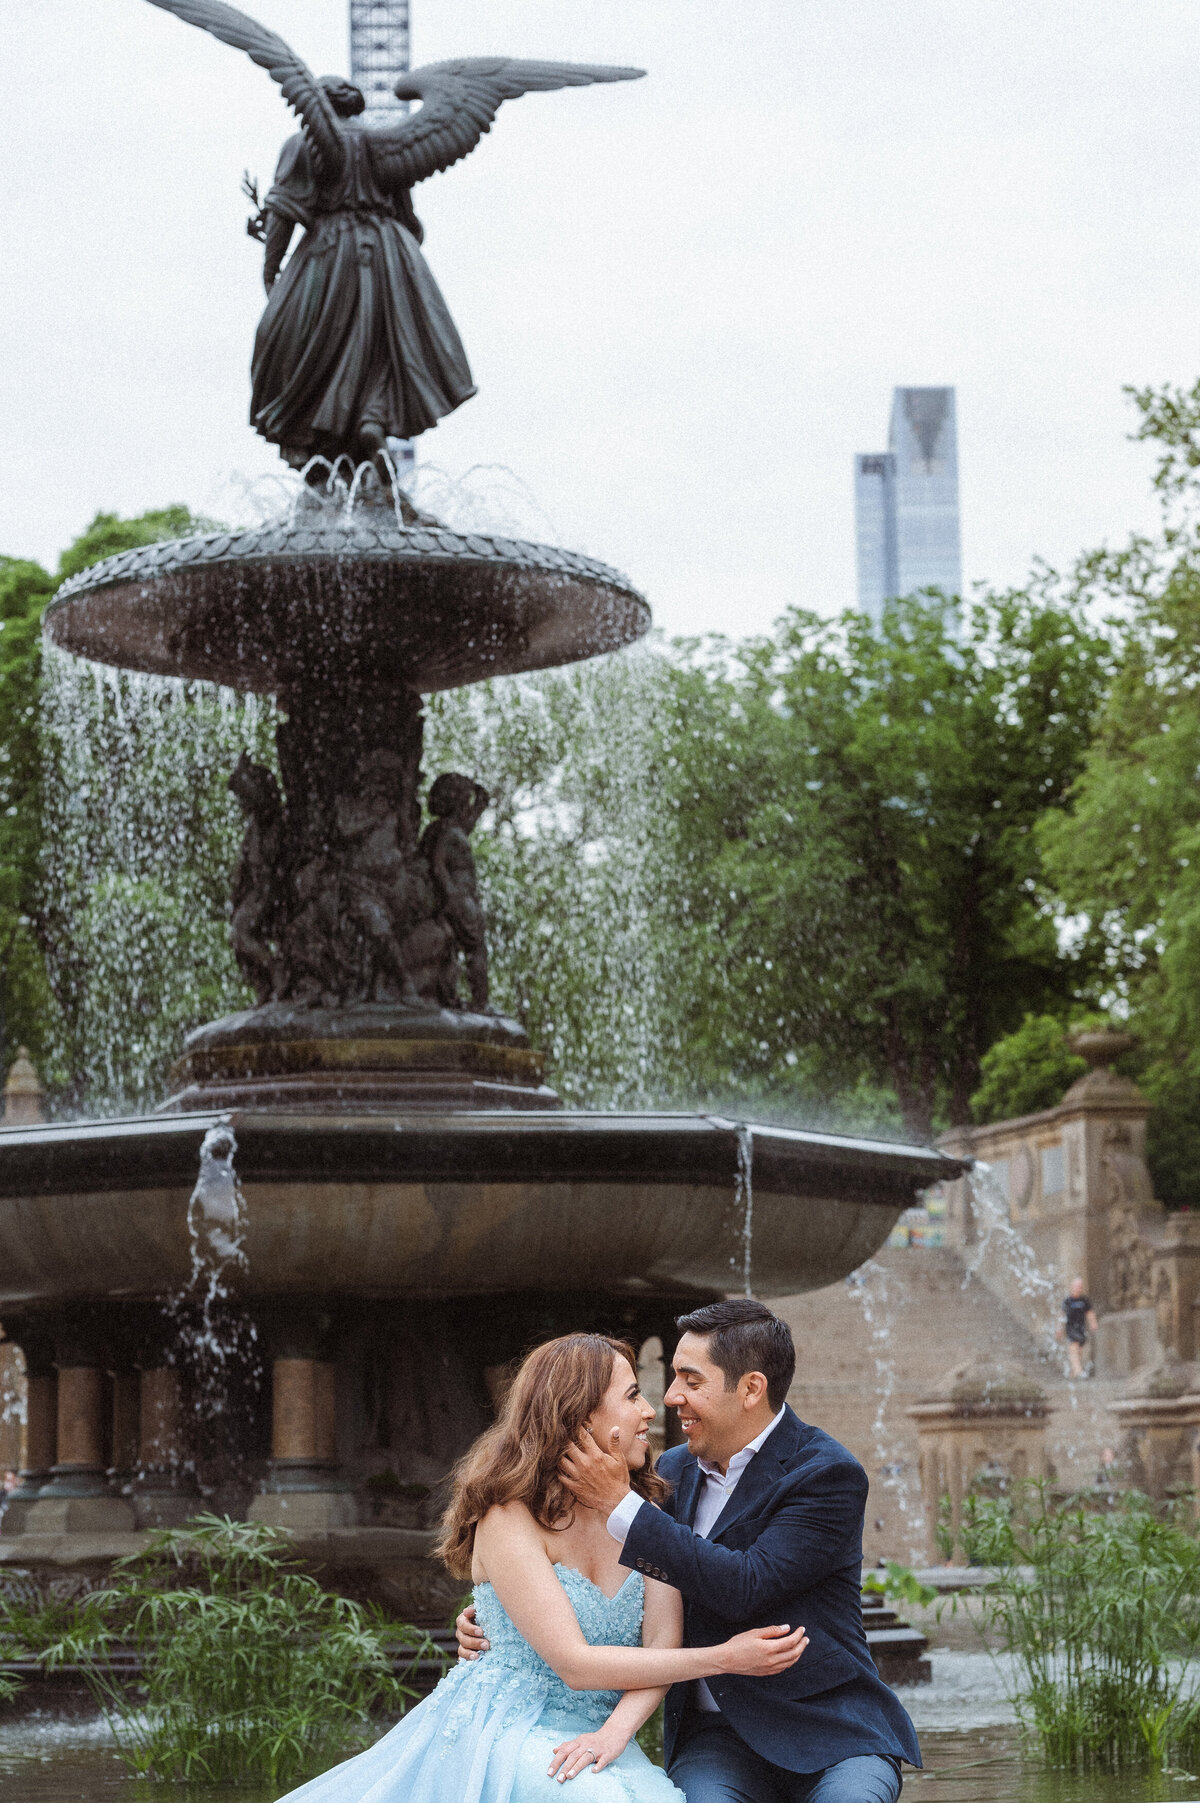 central-park-spring-engagement-photos-by-suess-moments-nj-wedding-photographer (33 of 50)